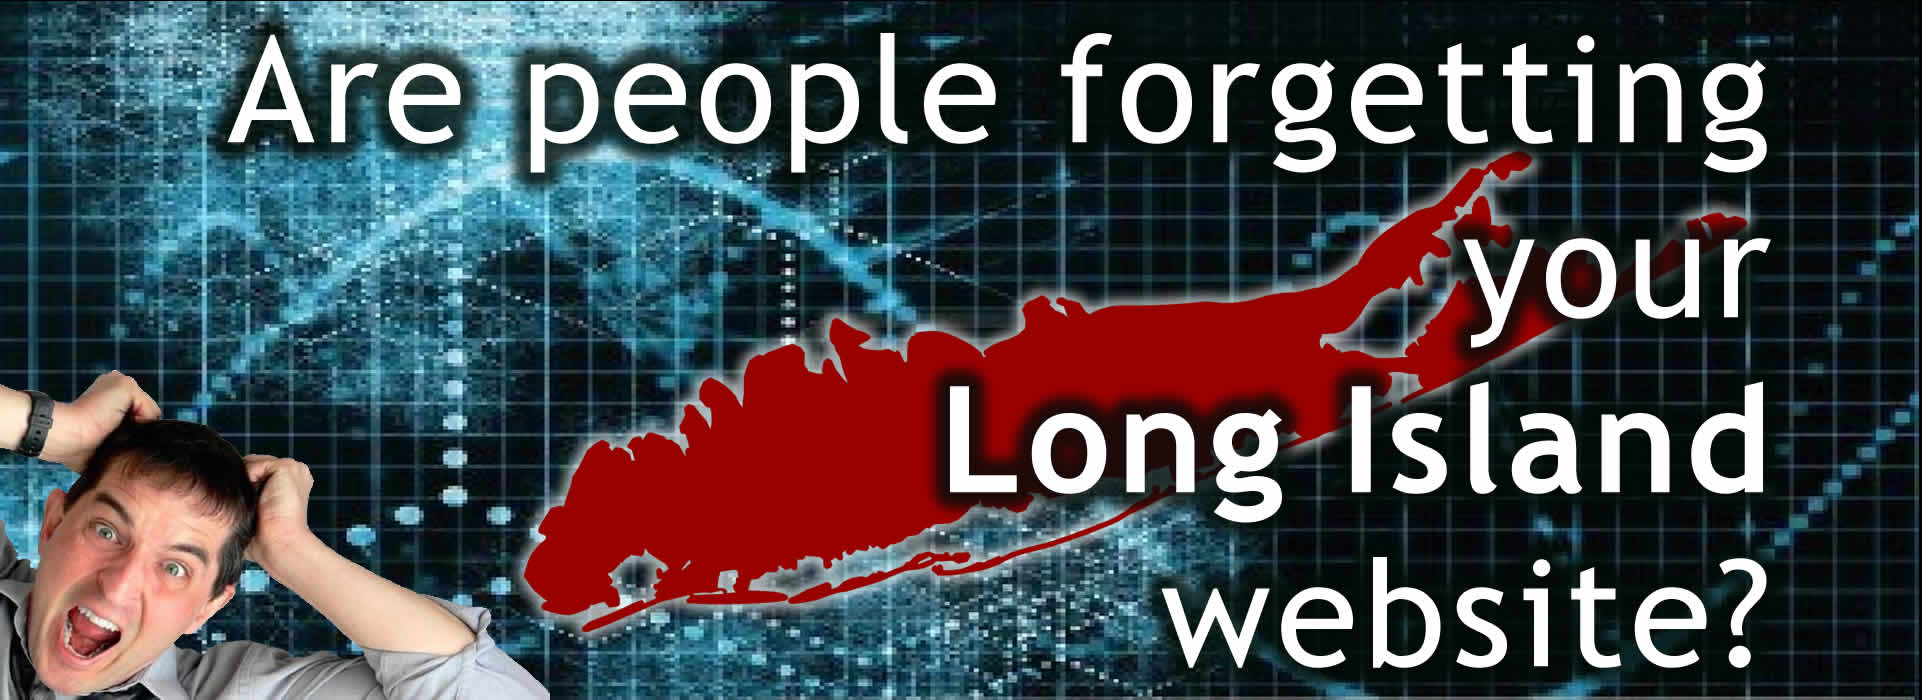 Are people forgetting your Long Island website?